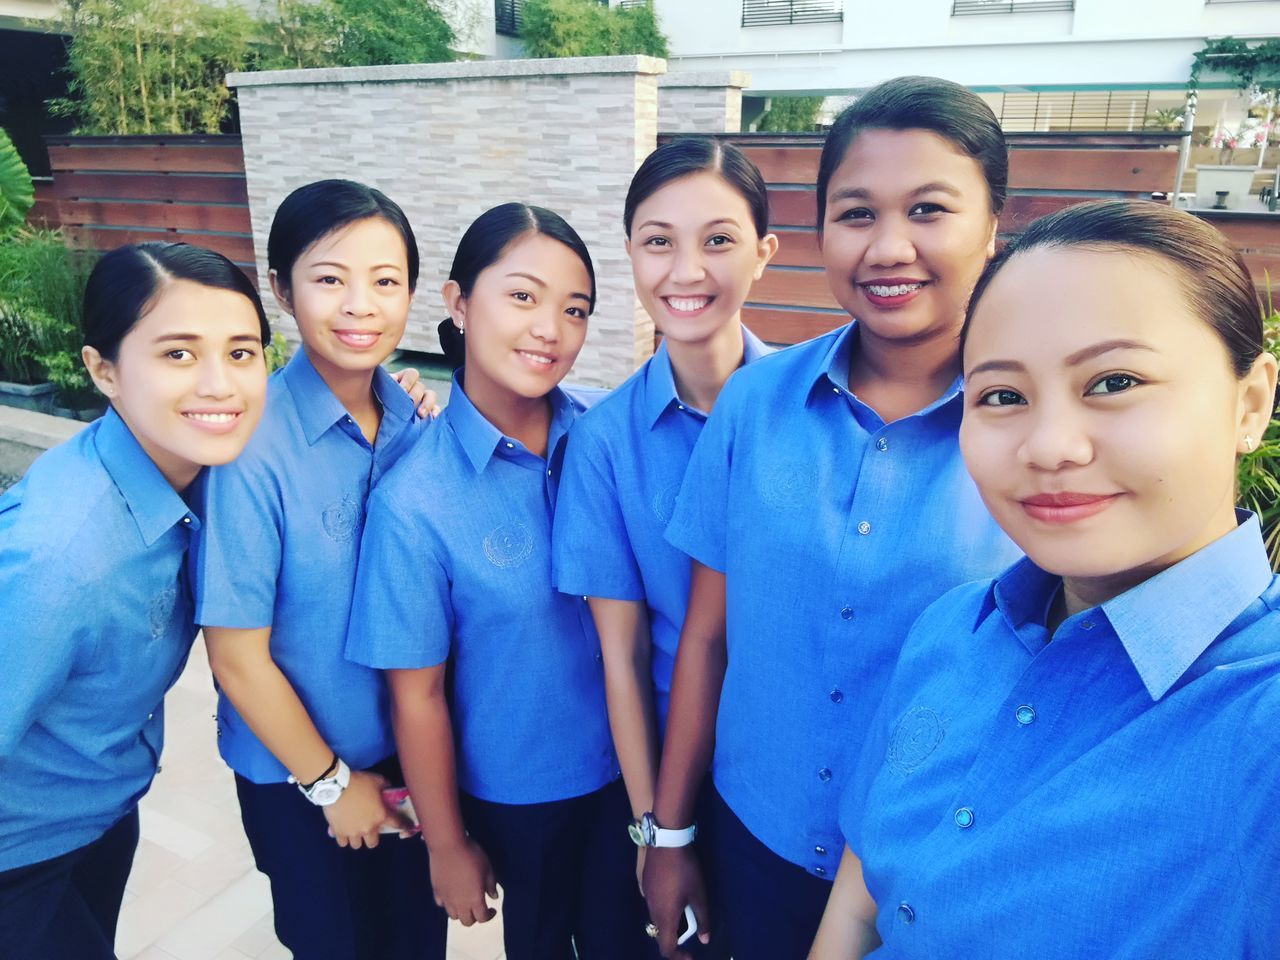 Lady officers